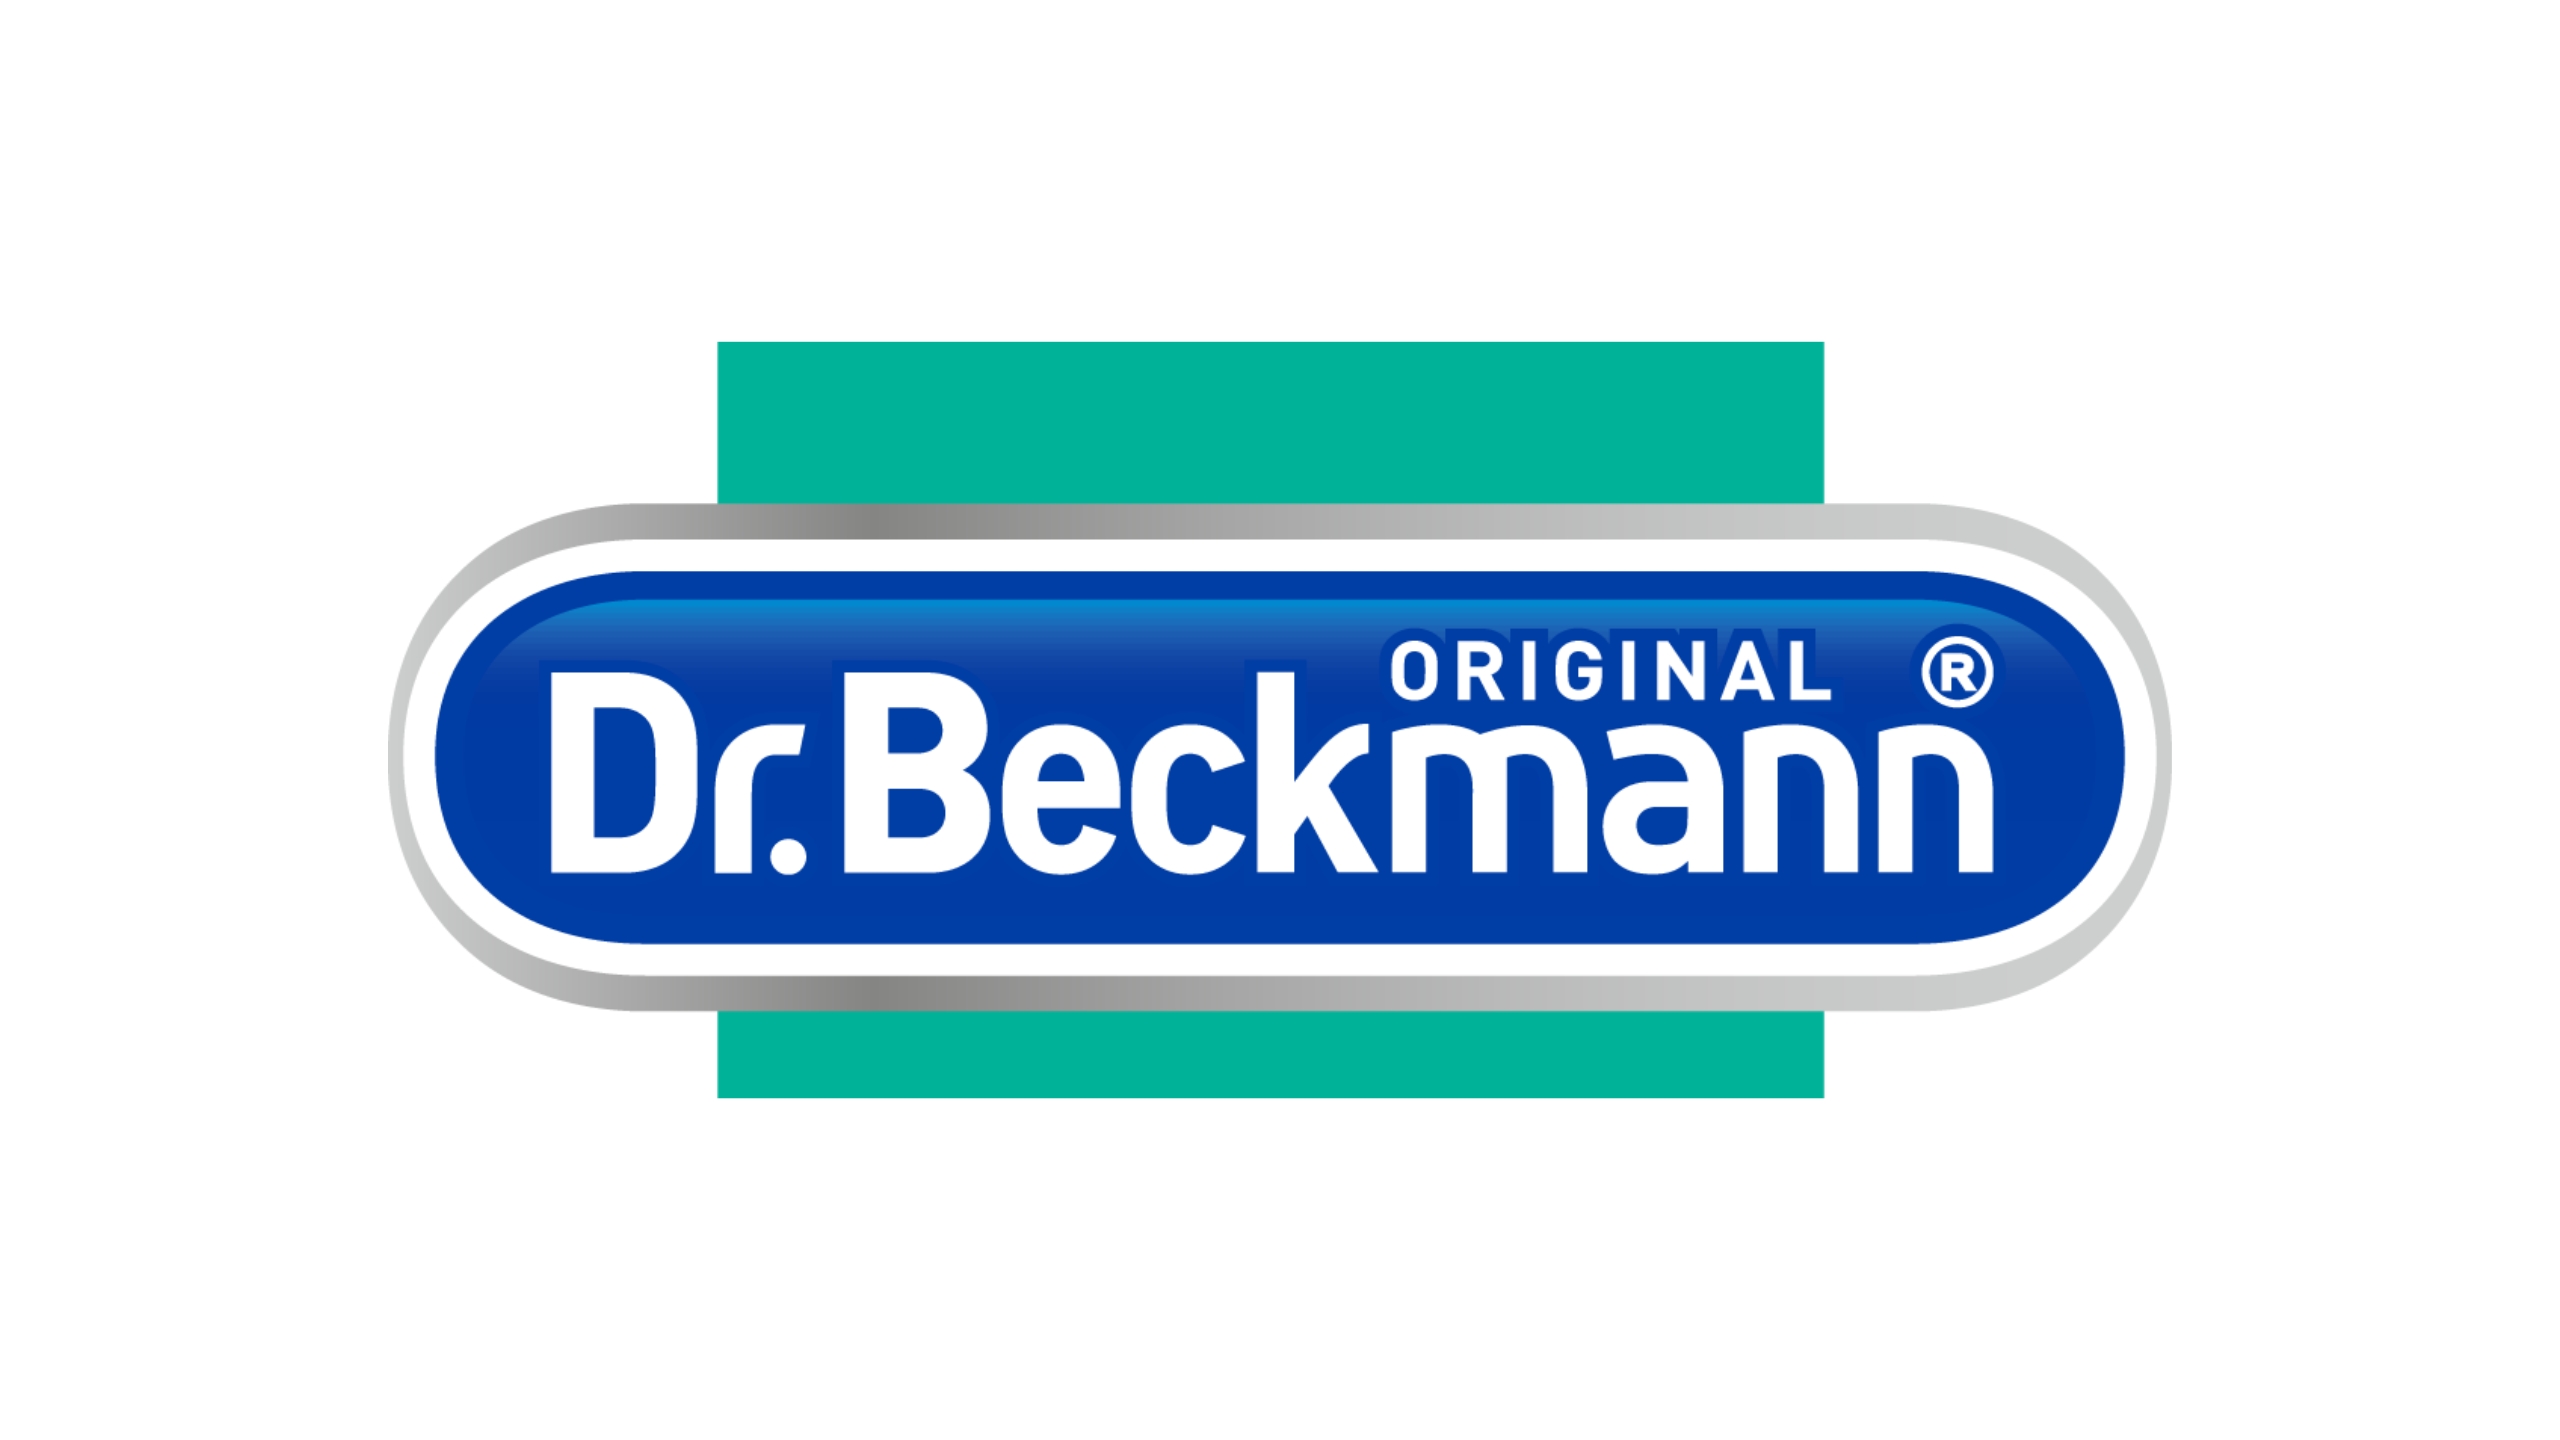 Dr. Beckmann special stain devil 50ml blood rust deodorant grass make up  stain r